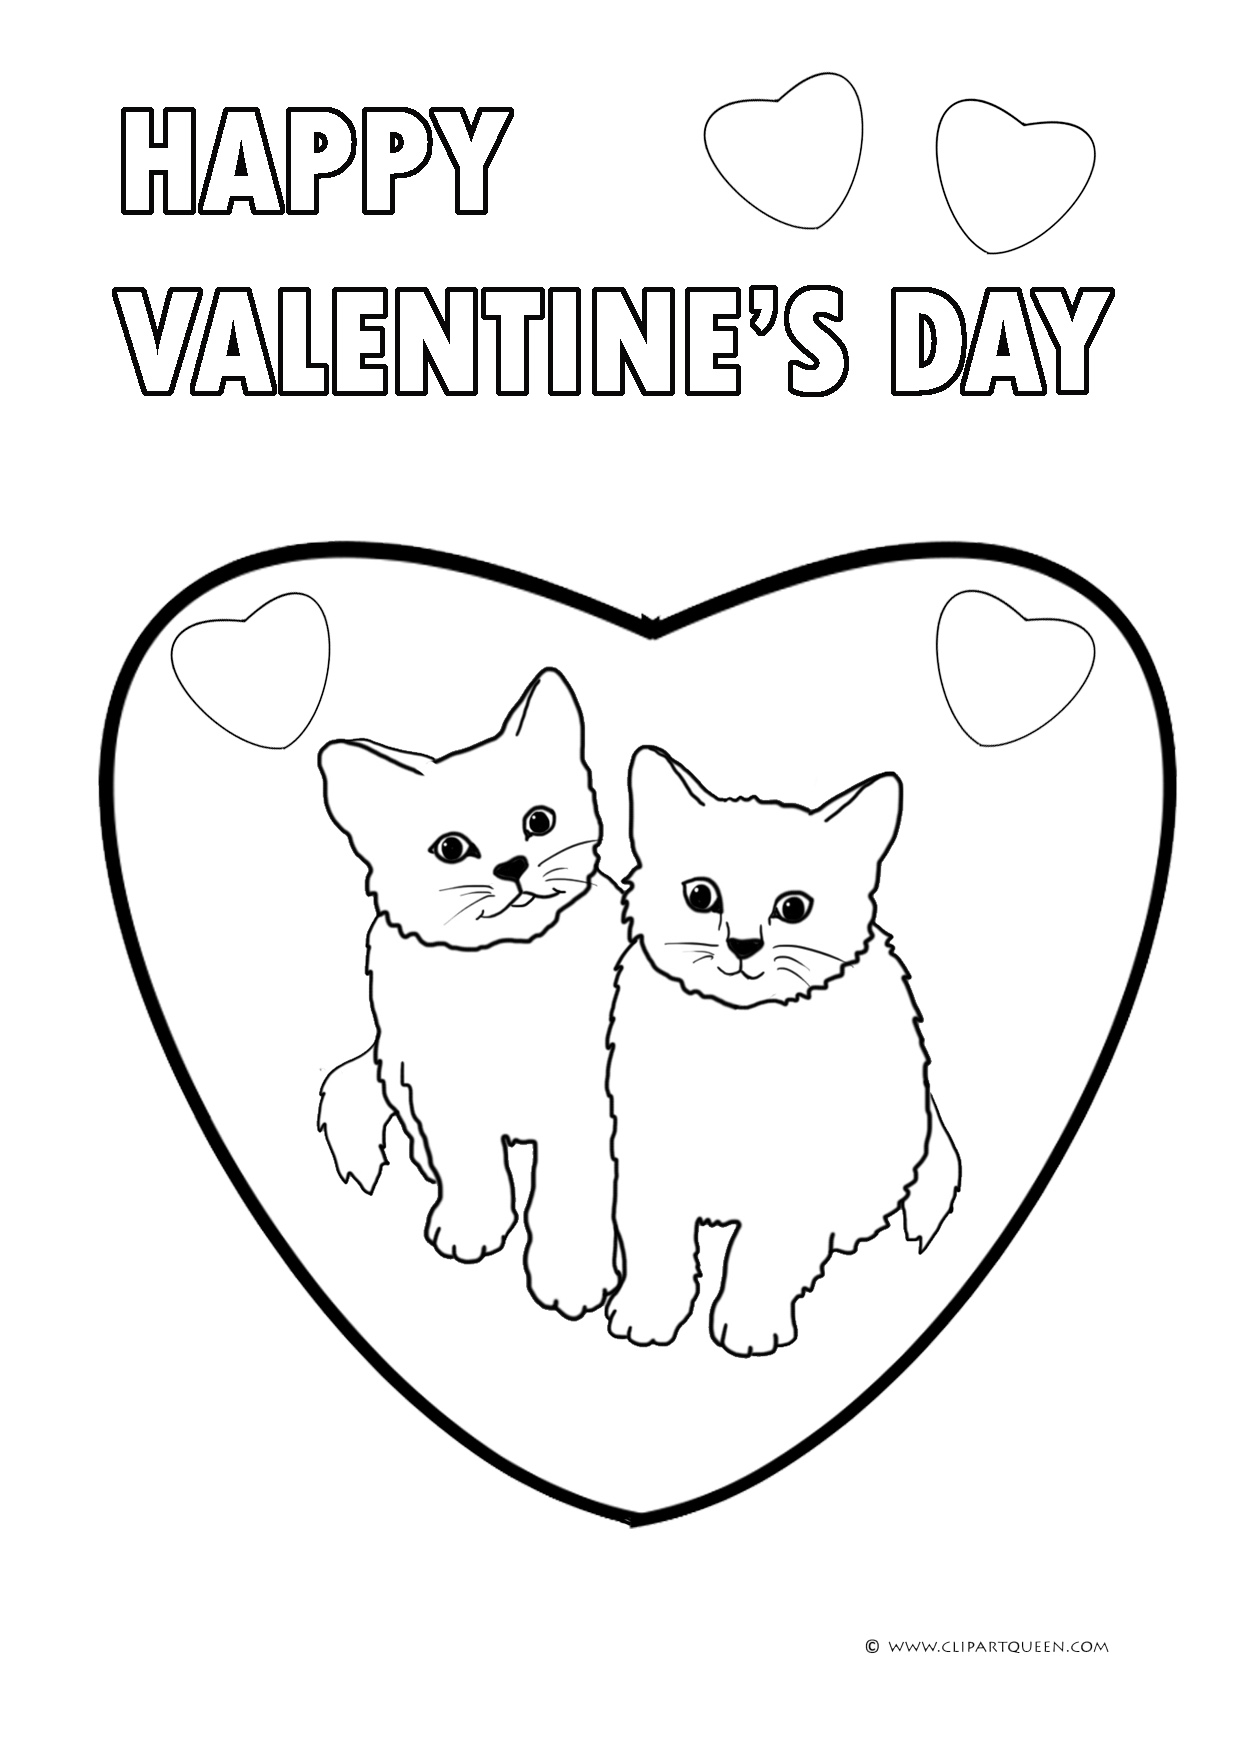 Download 21 Valentine S Day Coloring Pages